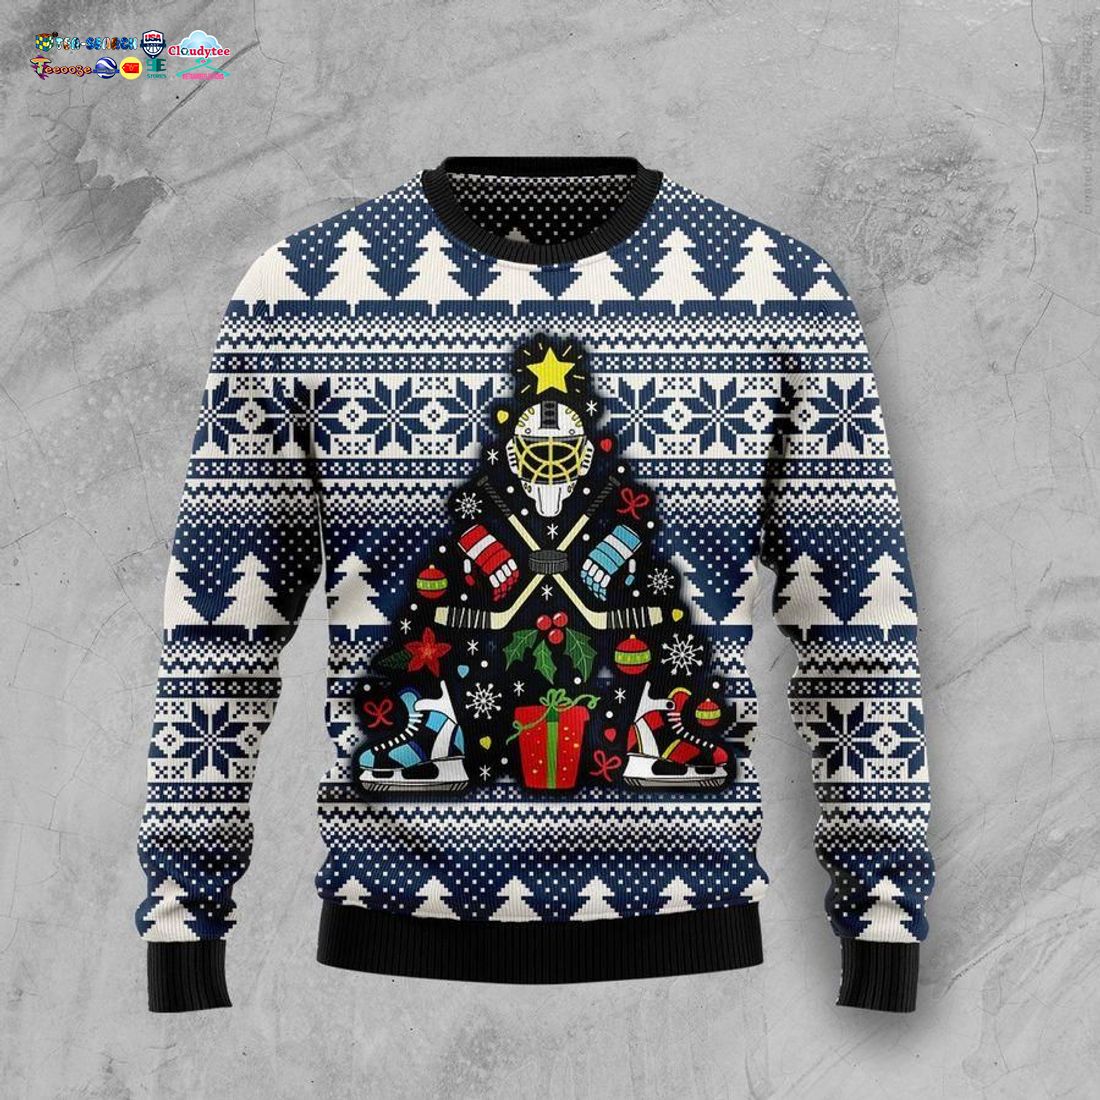 Hockey Ugly Christmas Sweater - You look insane in the picture, dare I say